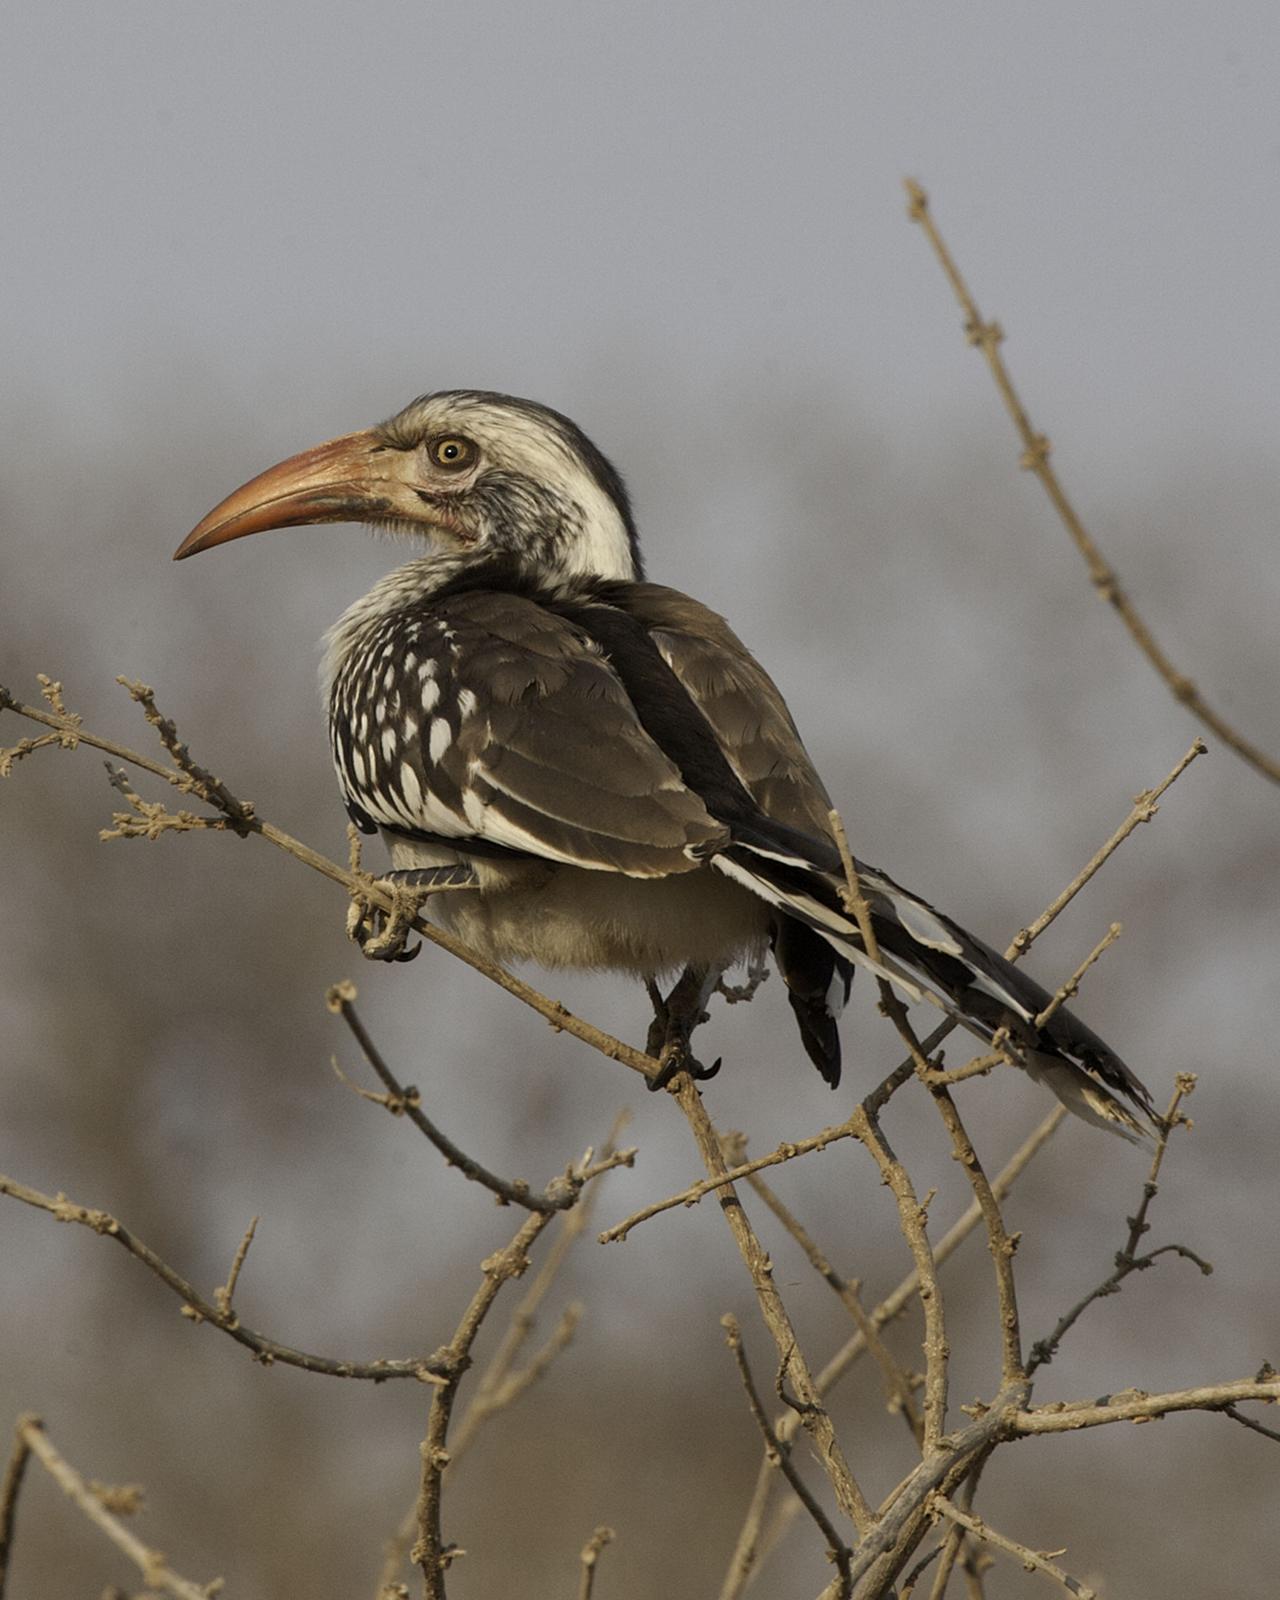 Southern Yellow-billed Hornbill Photo by Mary Ann Melton